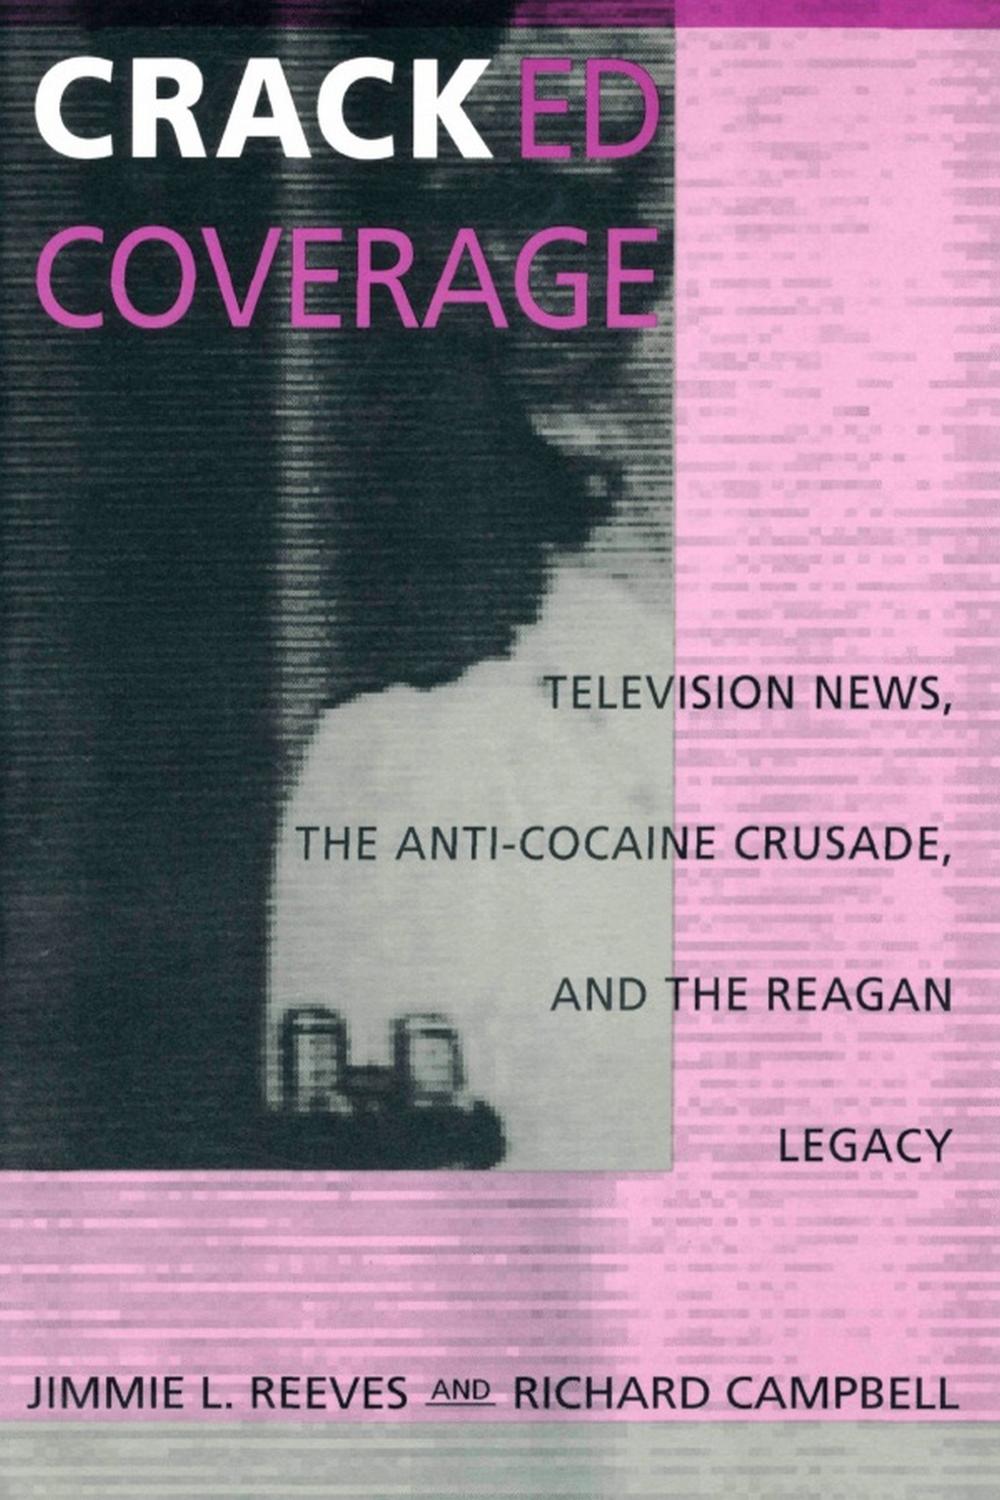 Cracked Coverage - Jimmie L. Reeves, Richard Campbell